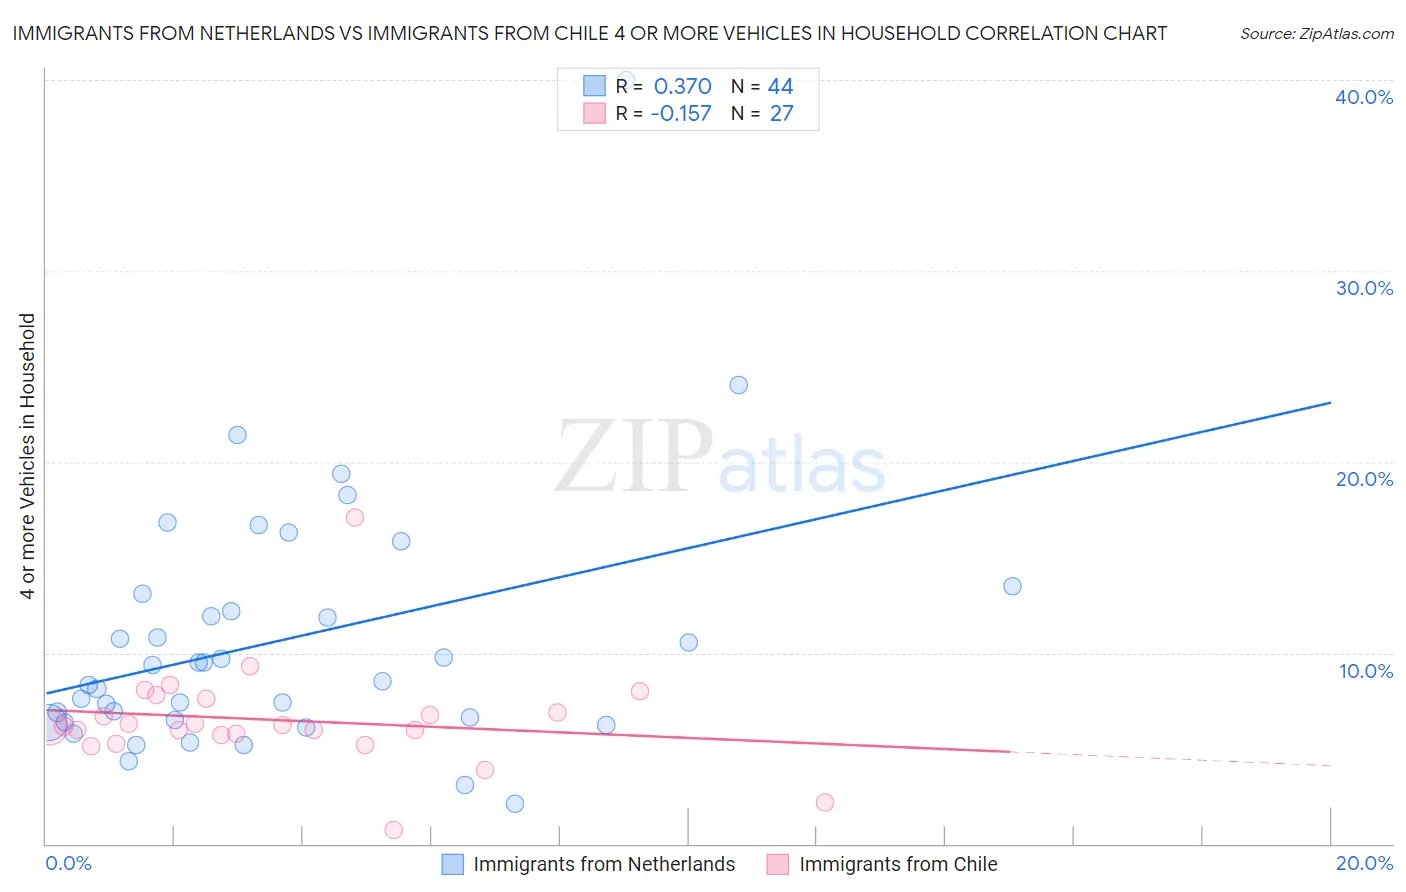 Immigrants from Netherlands vs Immigrants from Chile 4 or more Vehicles in Household